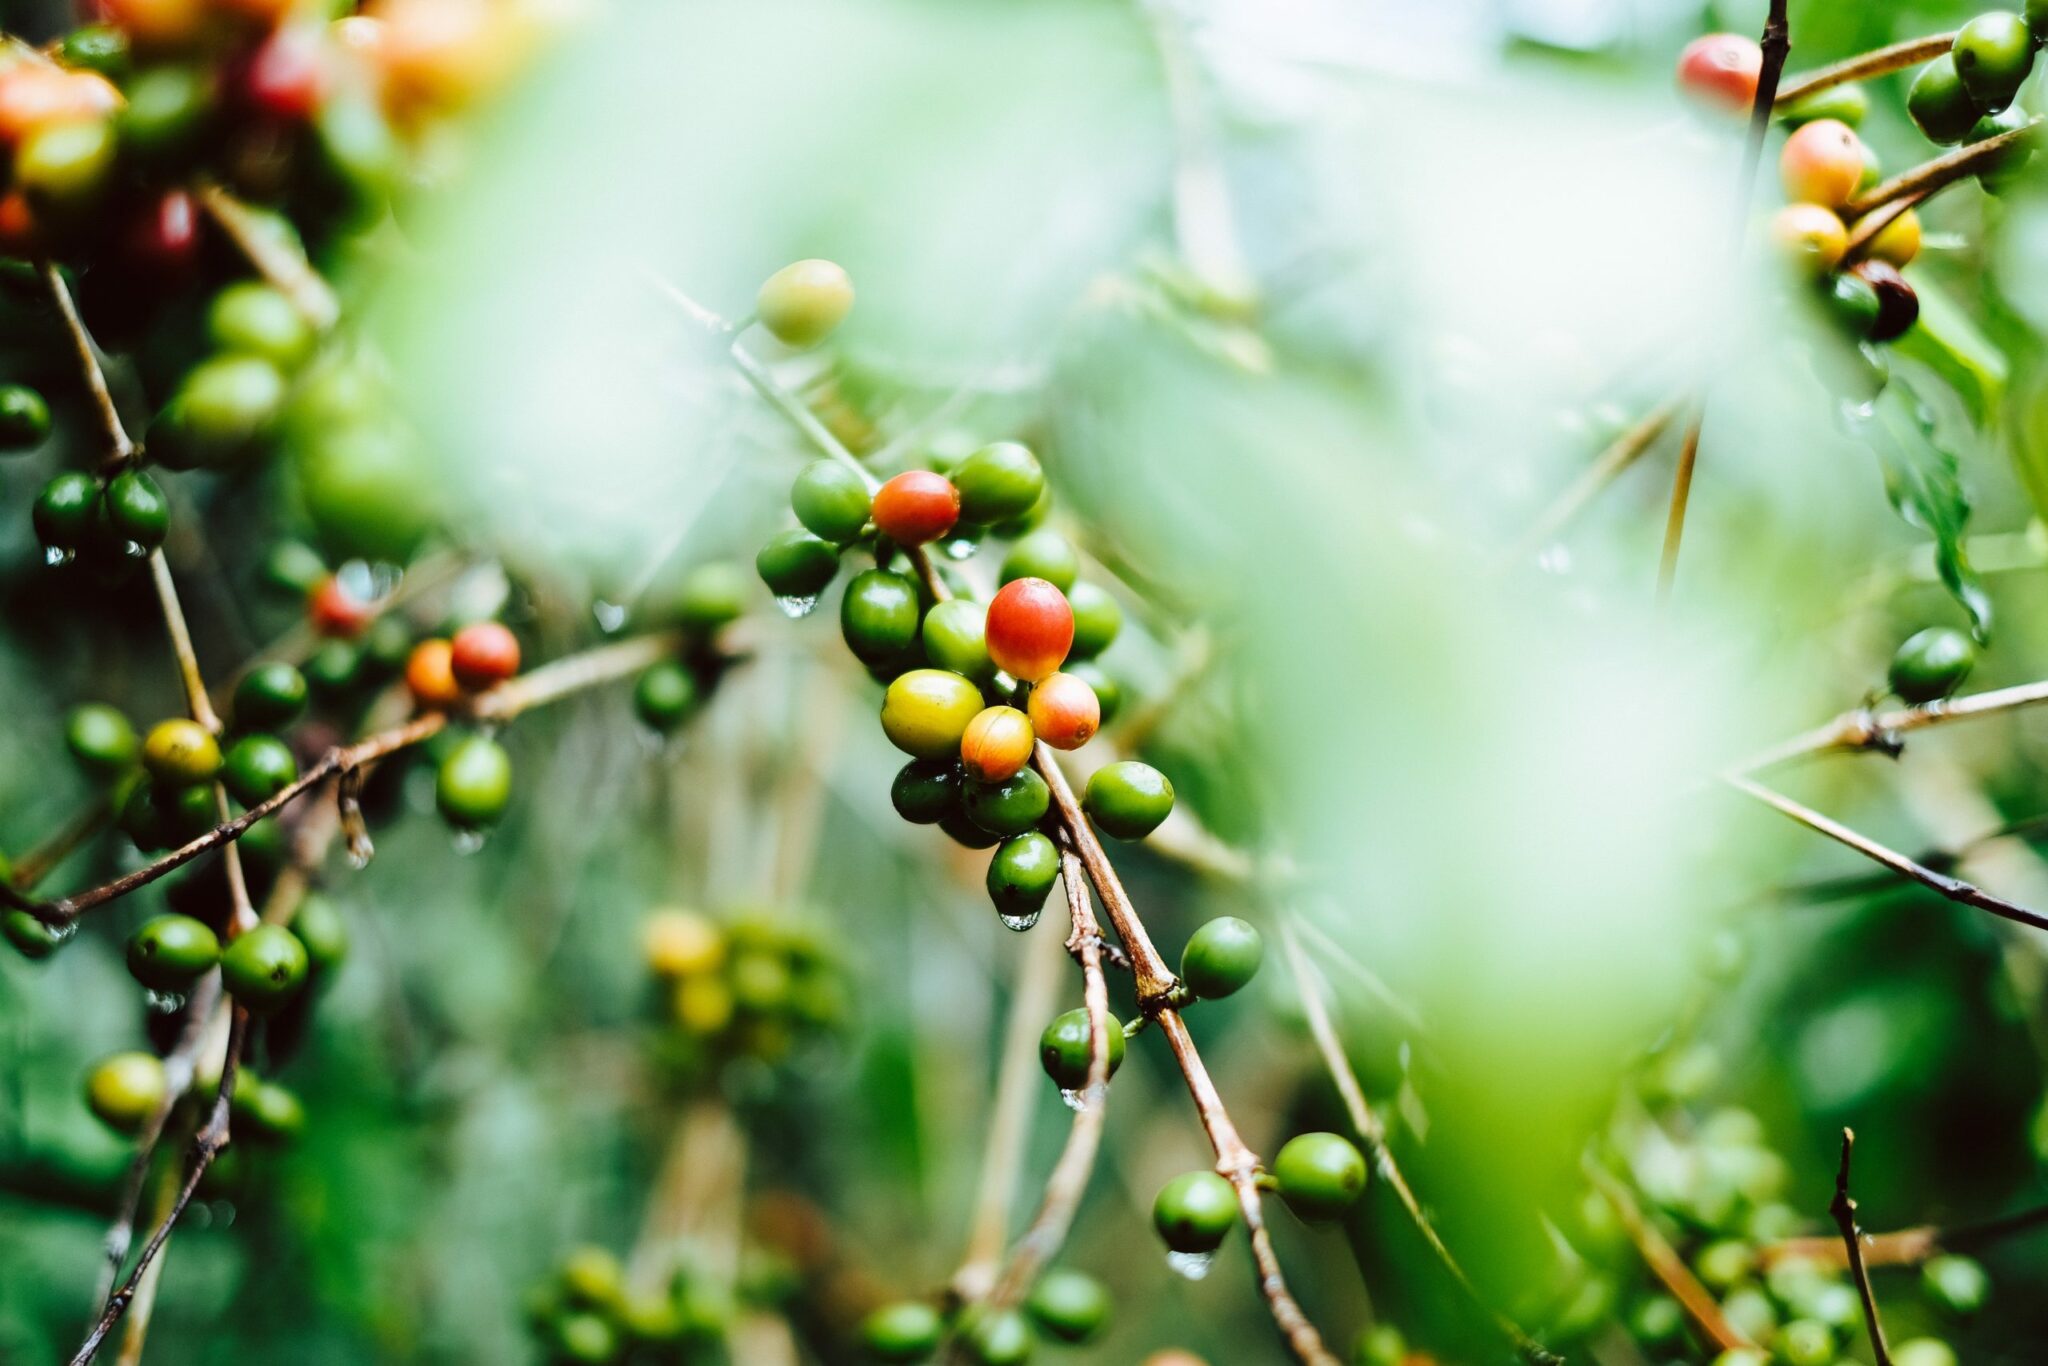 Do you know the differences between Arabica and Robusta coffee?